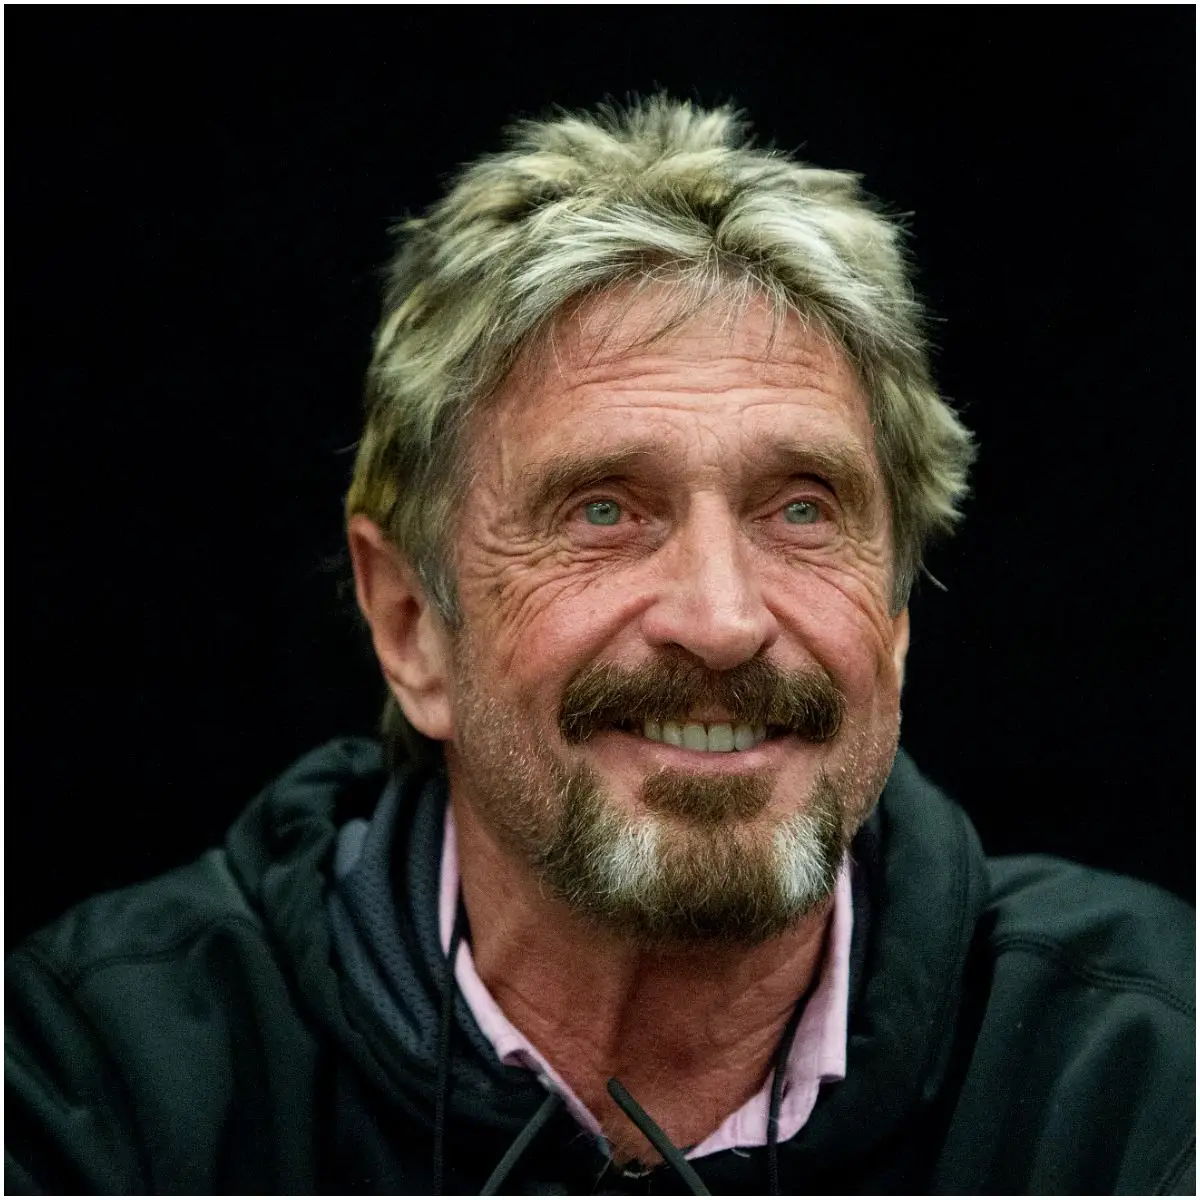 what is the net worth of John McAfee